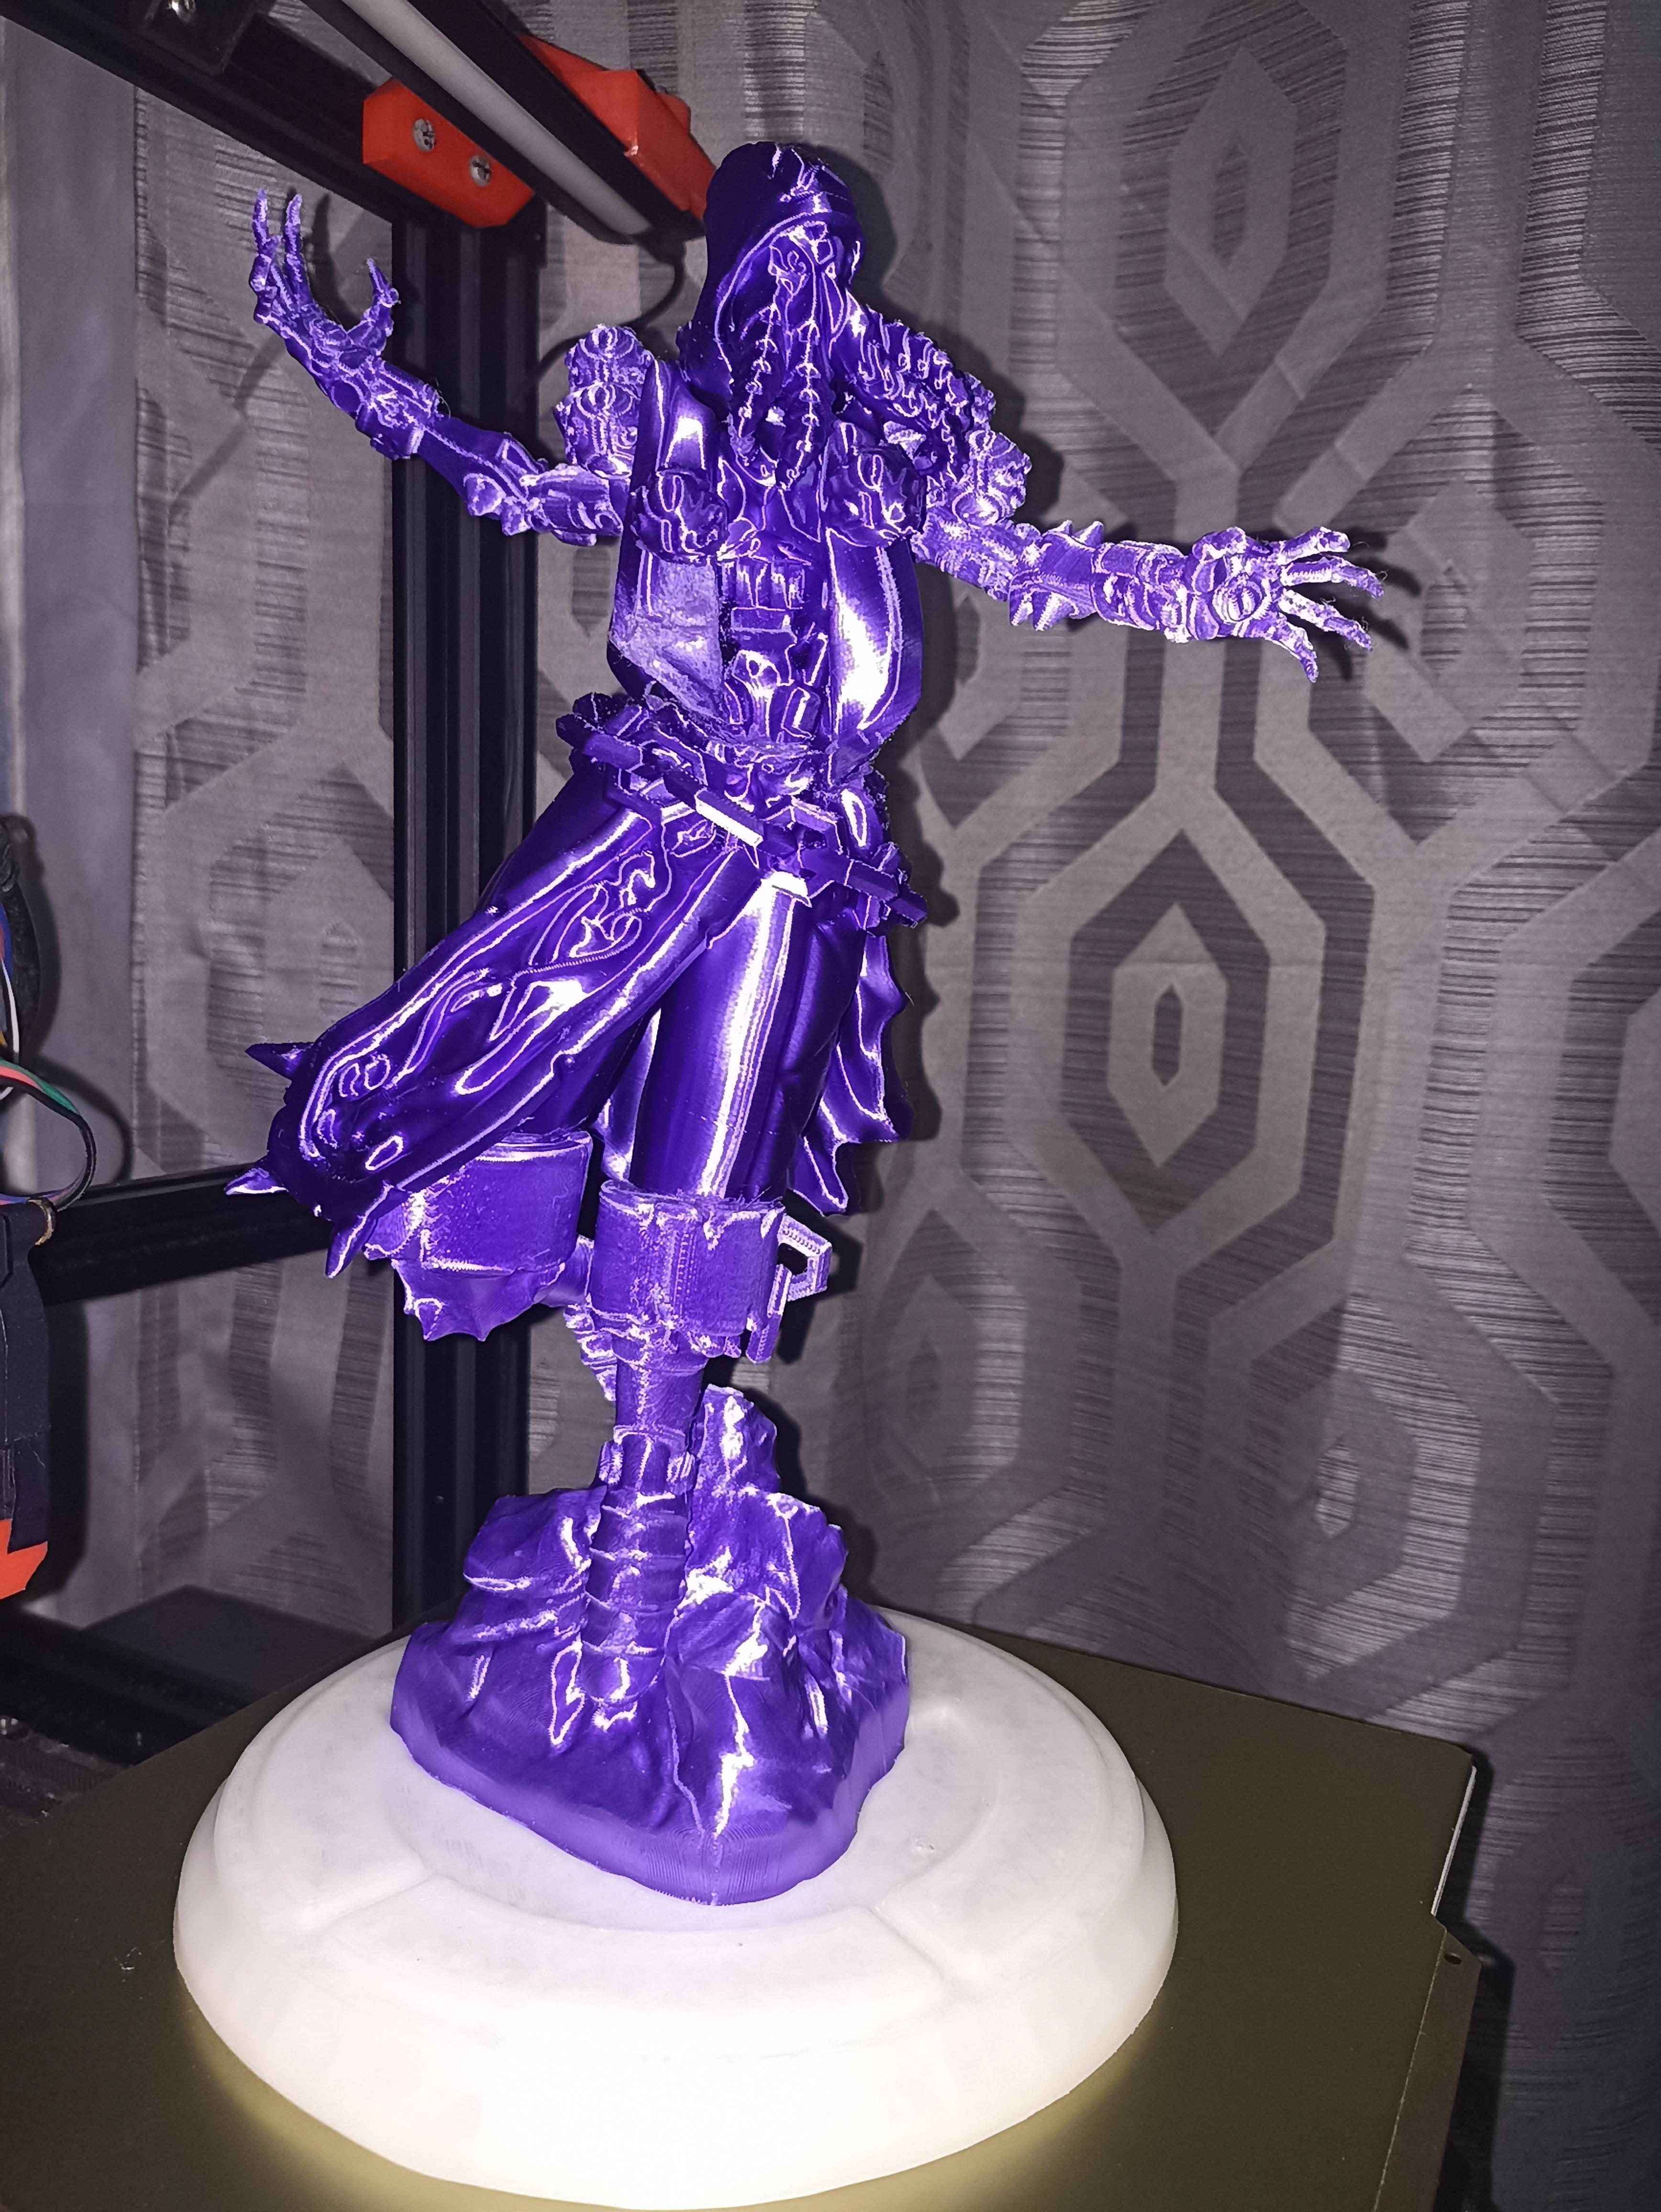 Cthulhu Zenyatta - Overwatch - Fanart - This thing looks amazing!!!!!

Just finished printing it
Base is Echien GITD(it faintly glows red)
Model is Polymaker purple silk

Might sand and paint it, not sure, it would be a first for me - 3d model